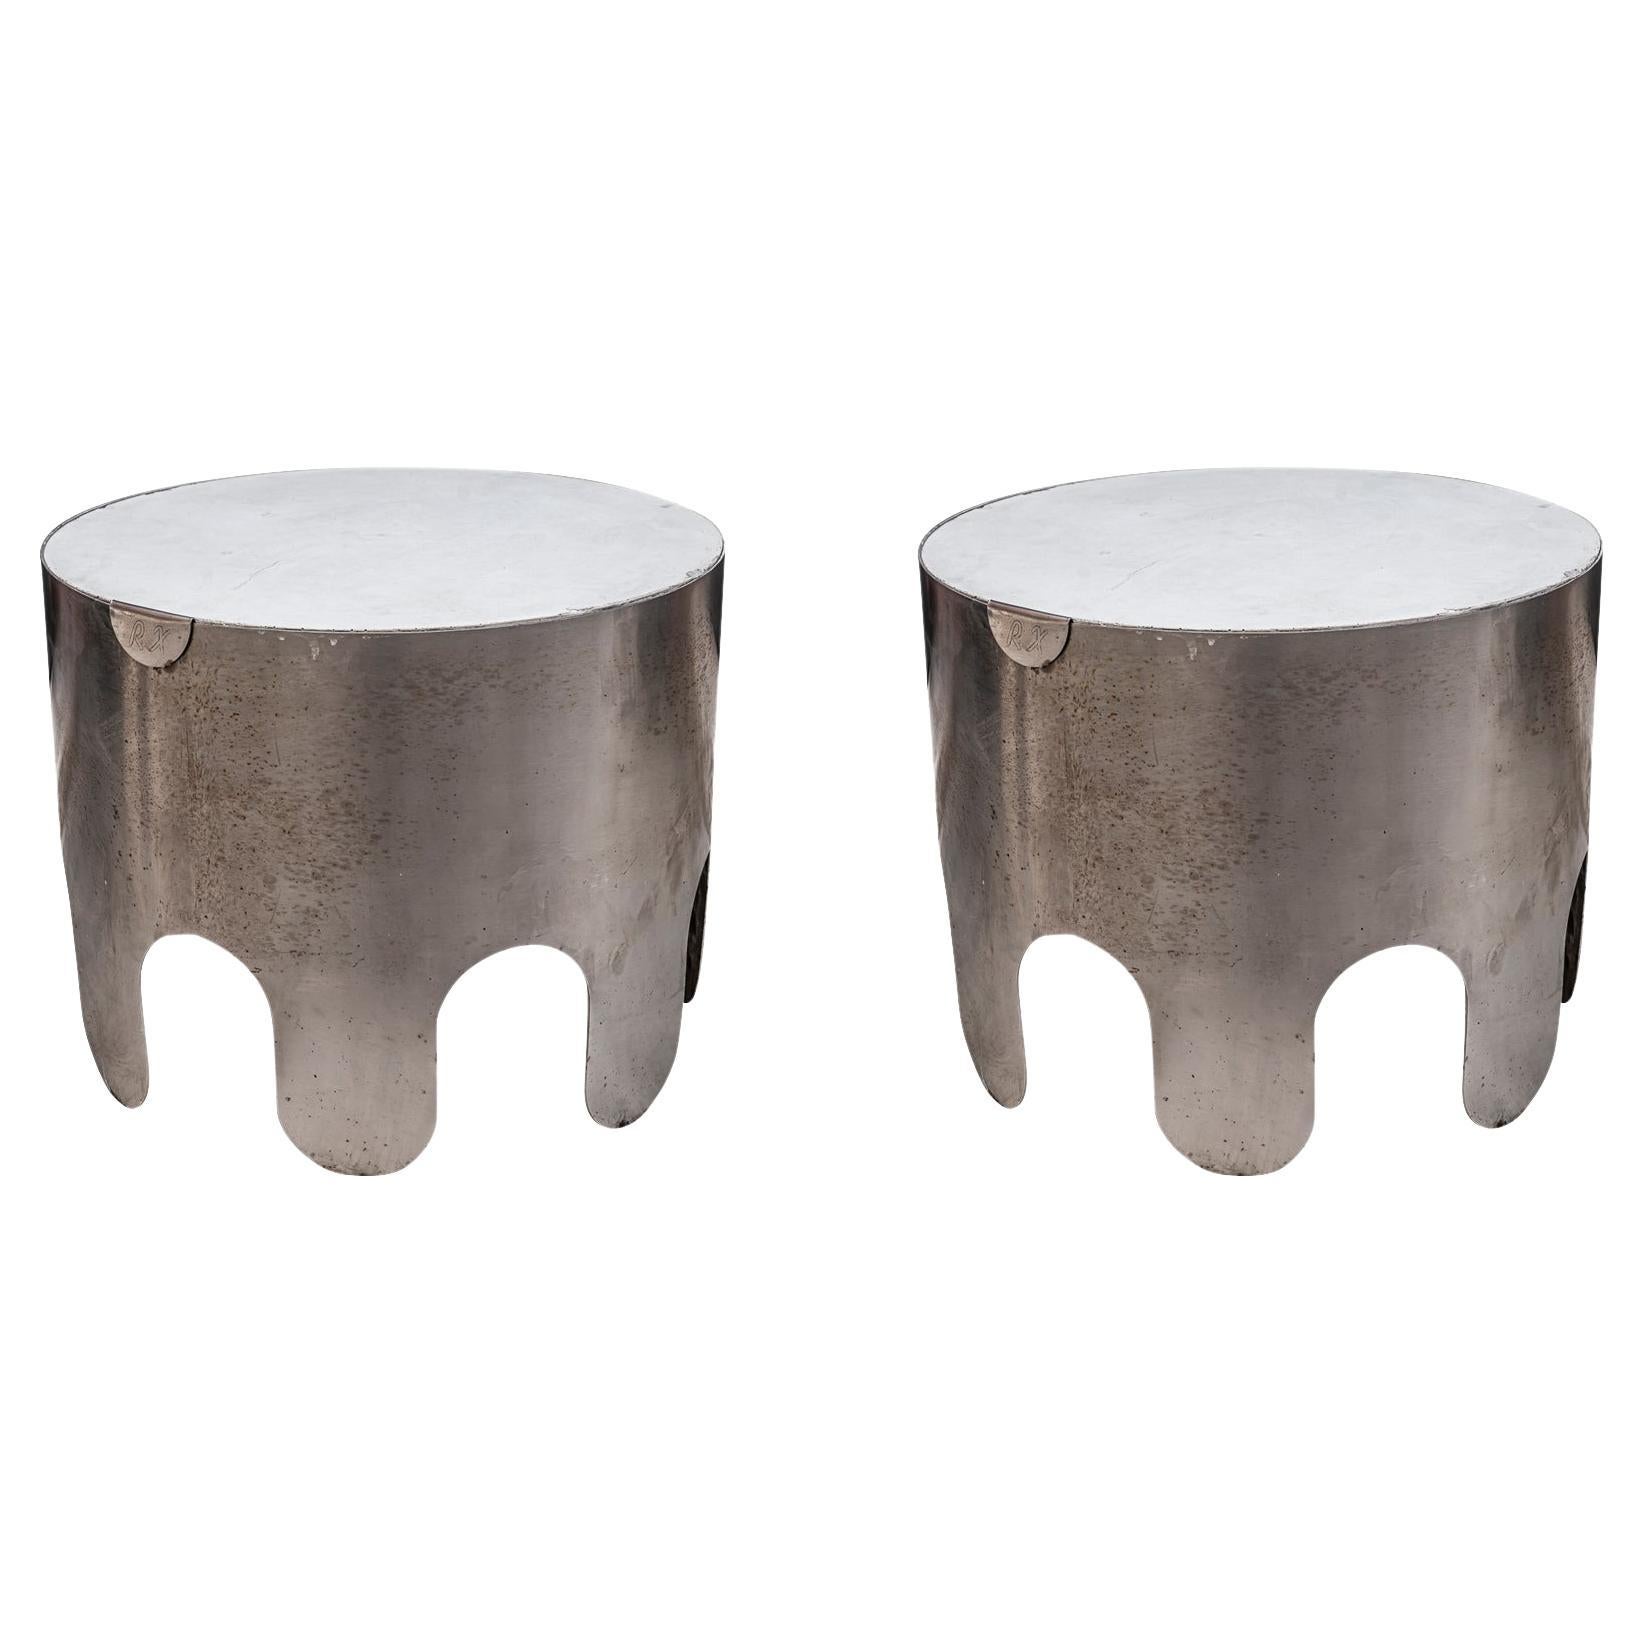 Pair of side tables, France, circa 1970